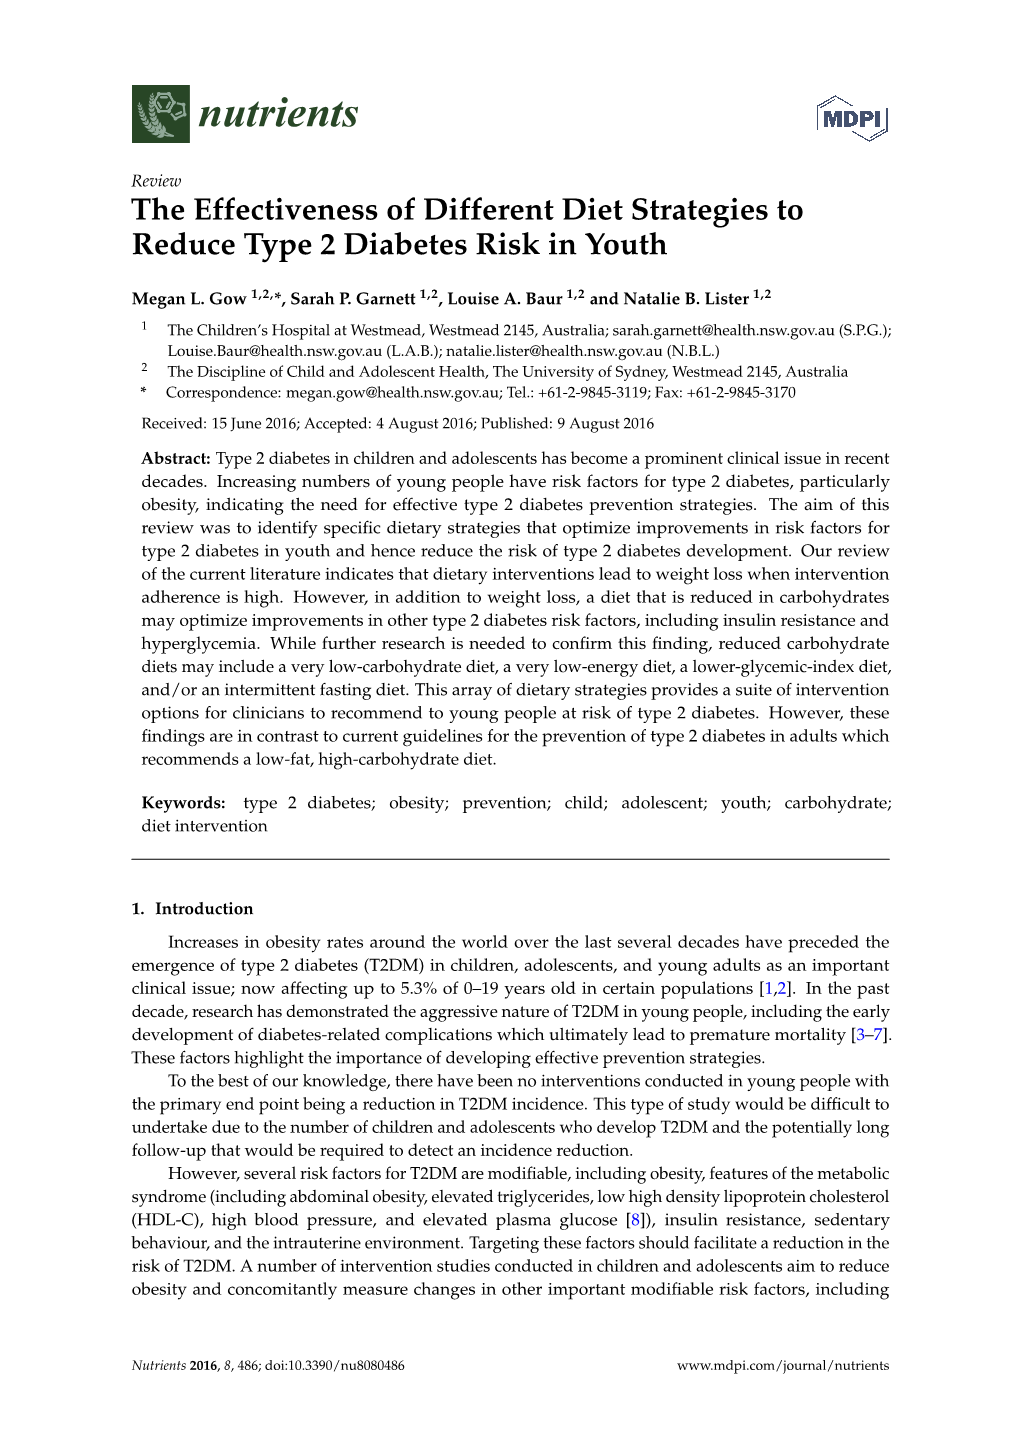 The Effectiveness of Different Diet Strategies to Reduce Type 2 Diabetes Risk in Youth